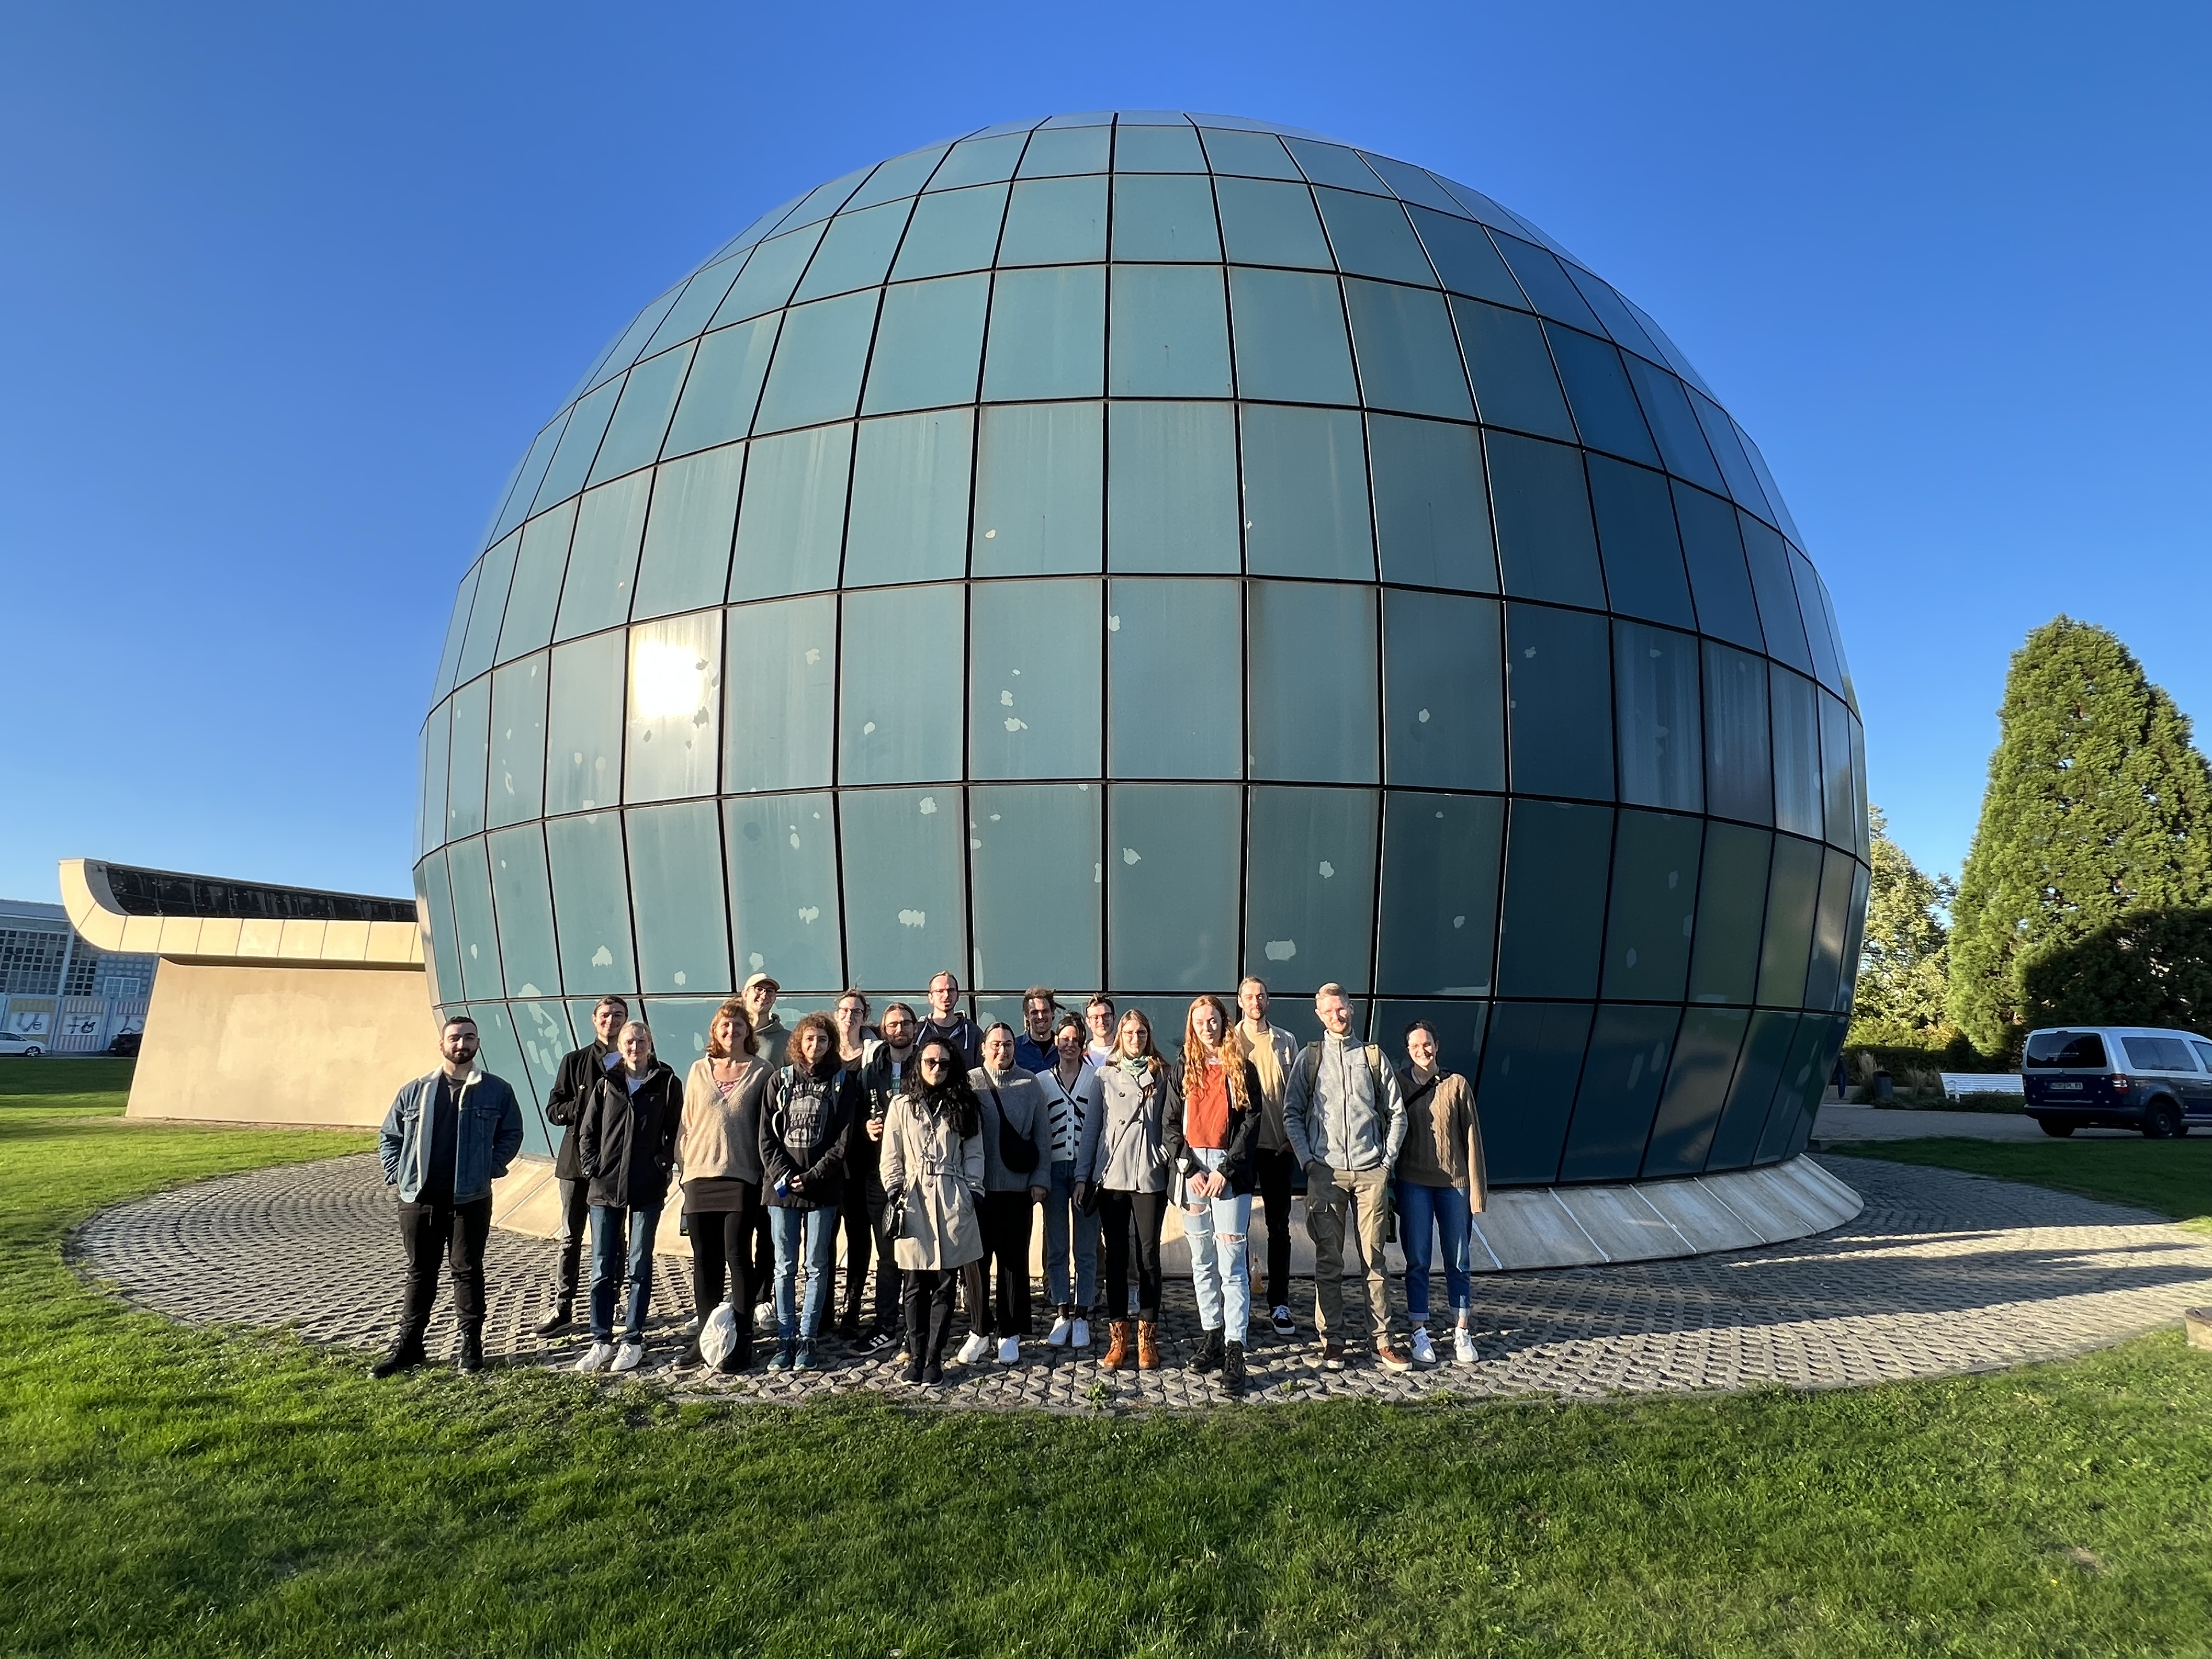 Image of PhD student in front of the Planetarium in Wolfsburg